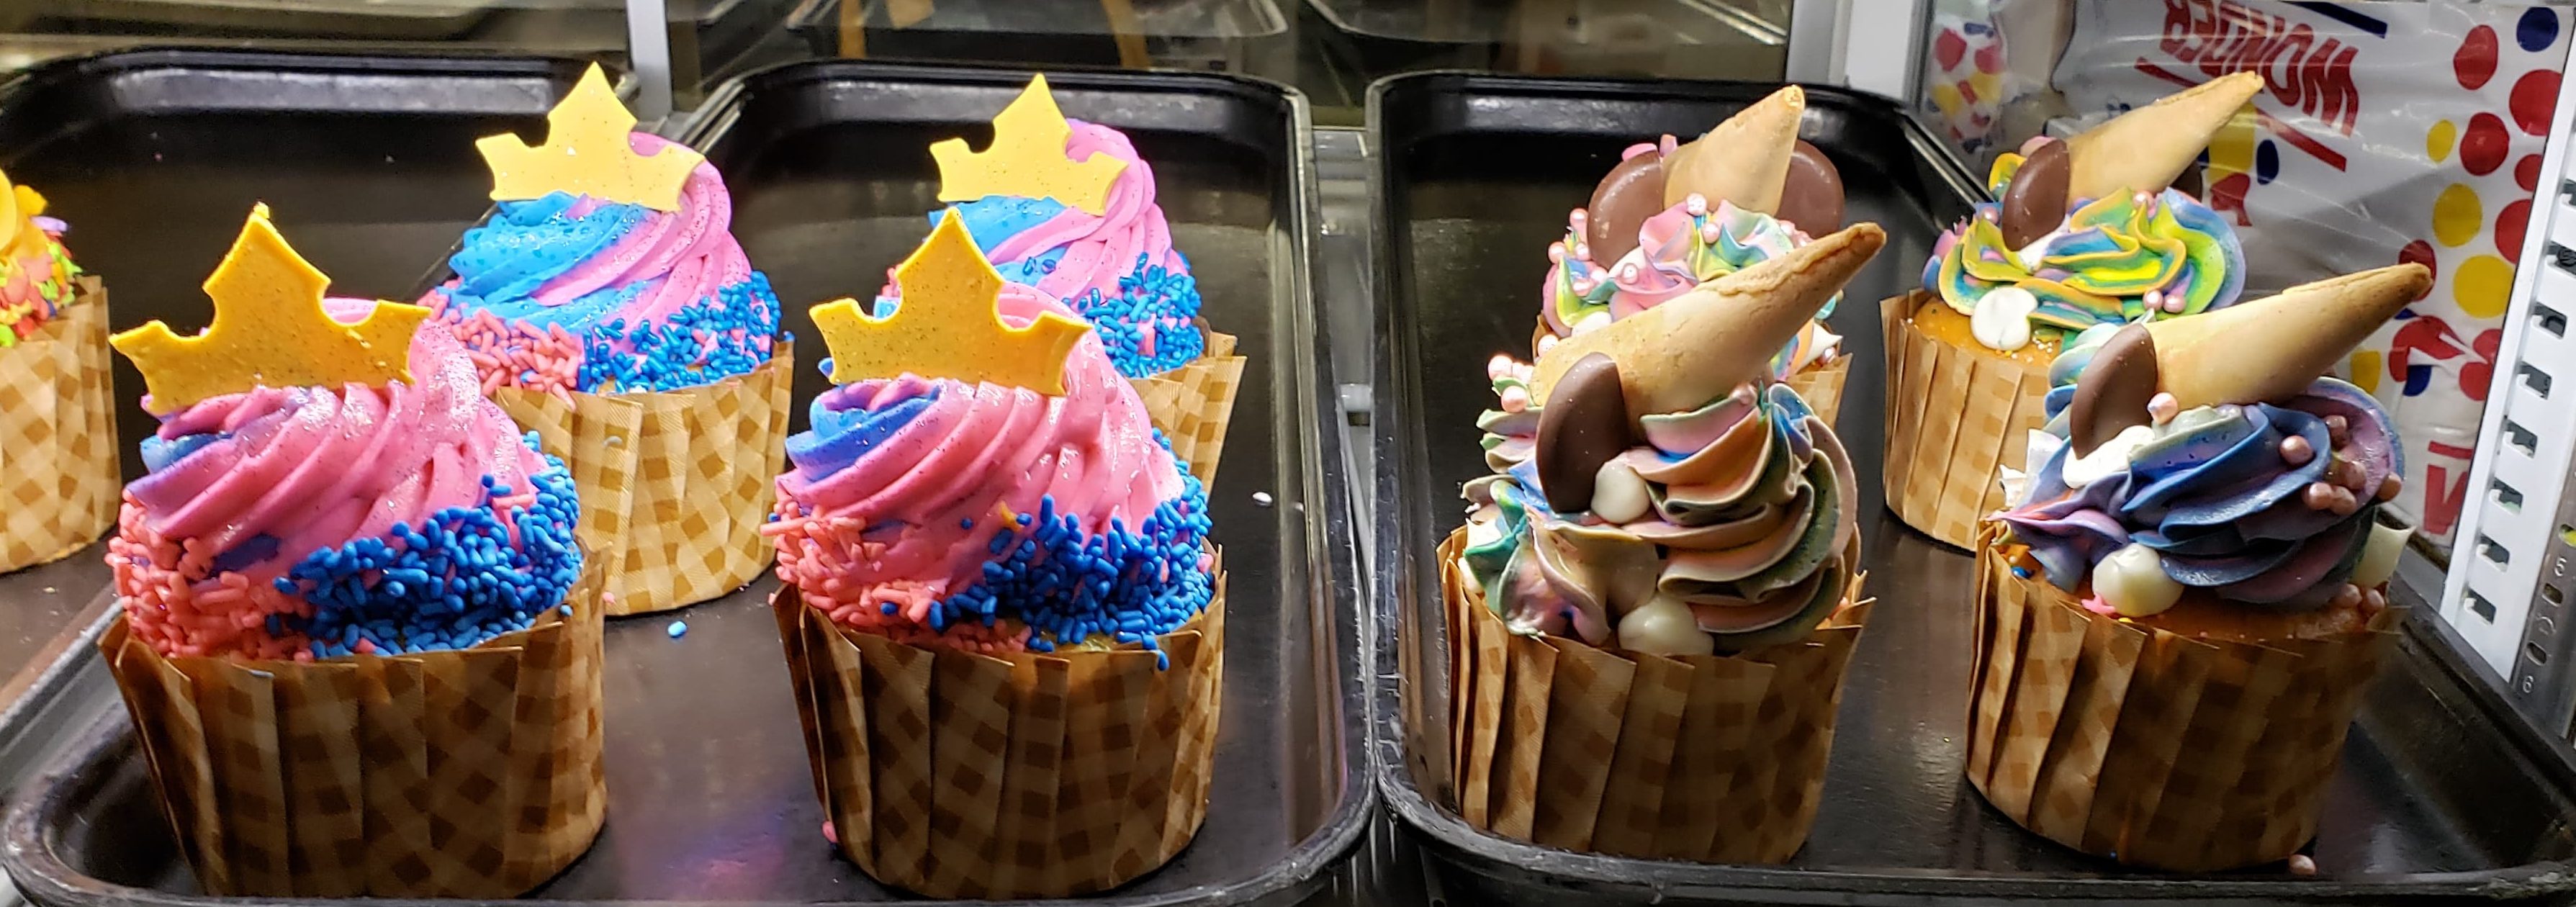 New Cupcakes At Intermission Food Court